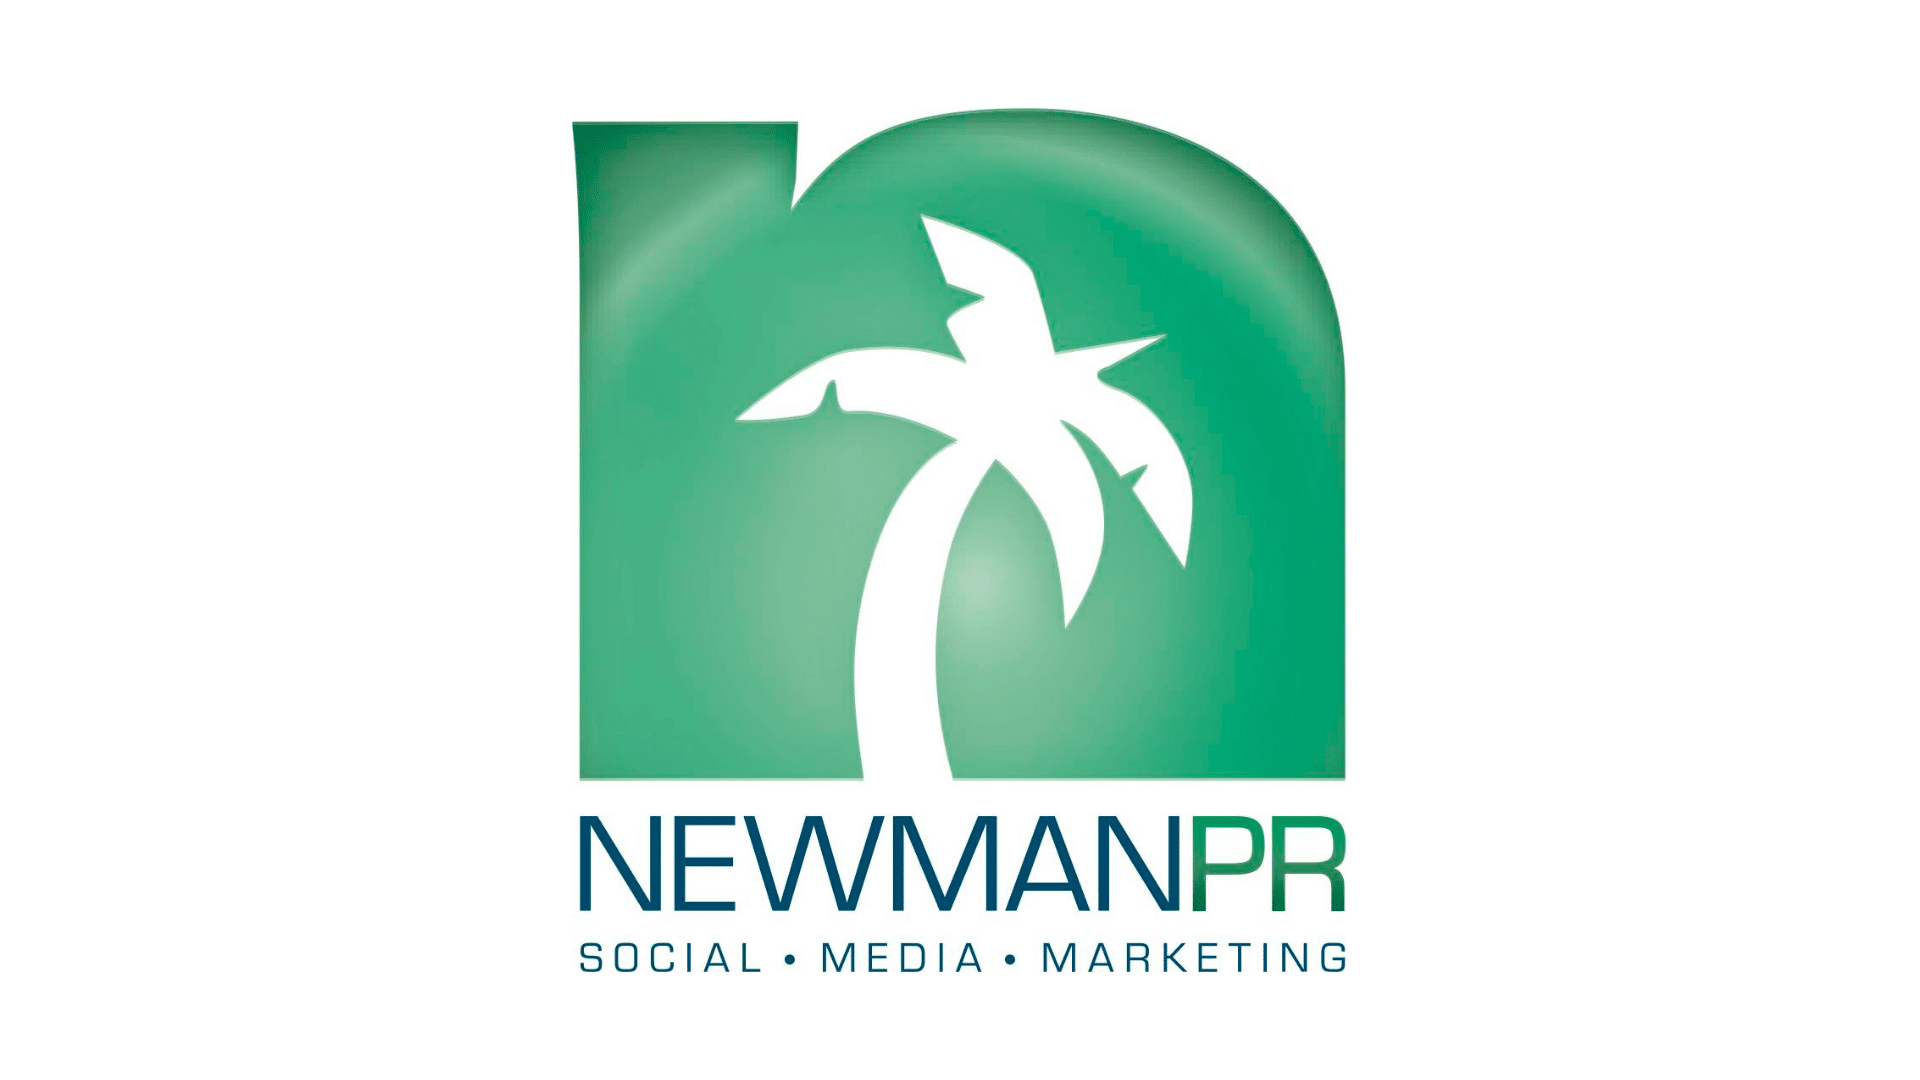 Old fashioned values, modern outcomes: How Agility helps NewmanPR provide top results for its clients